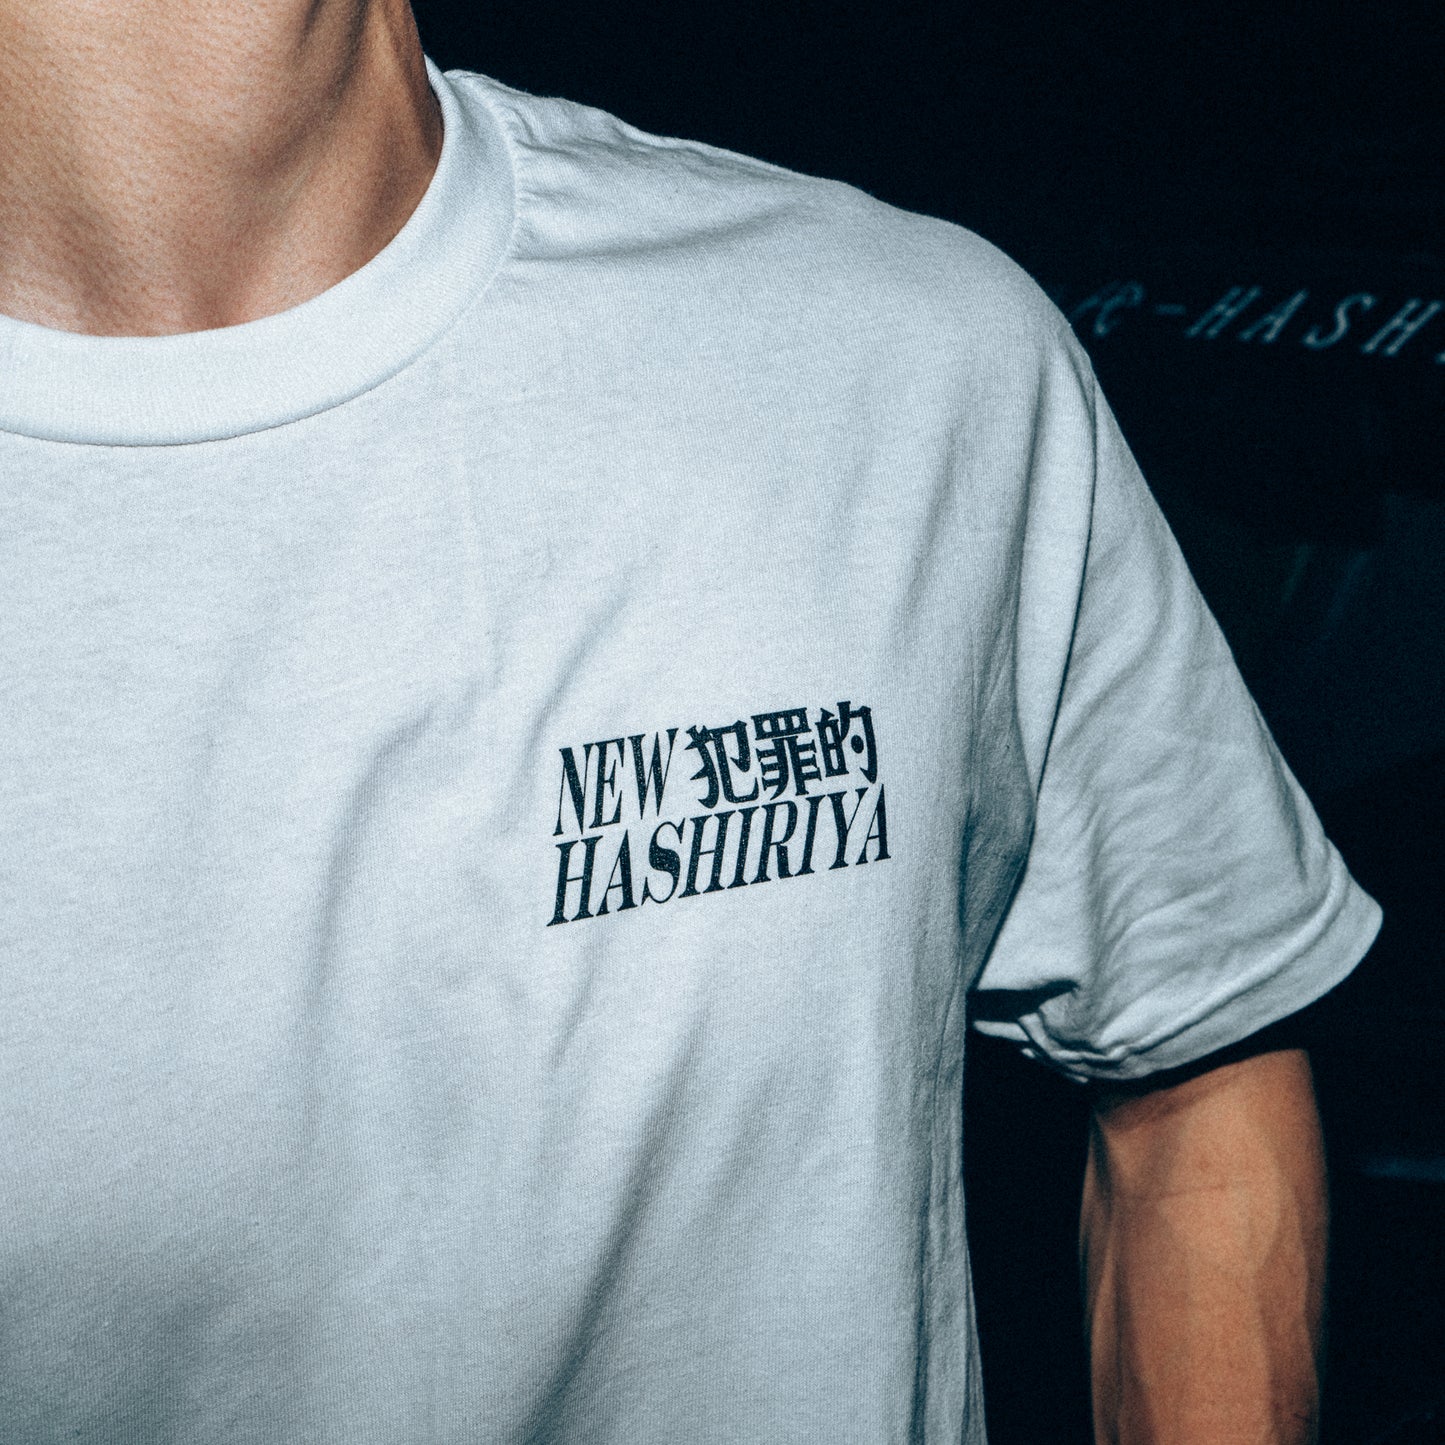 [𝙎𝙊𝙇𝘿 𝙊𝙐𝙏] 'Touge is not a crime' Tee